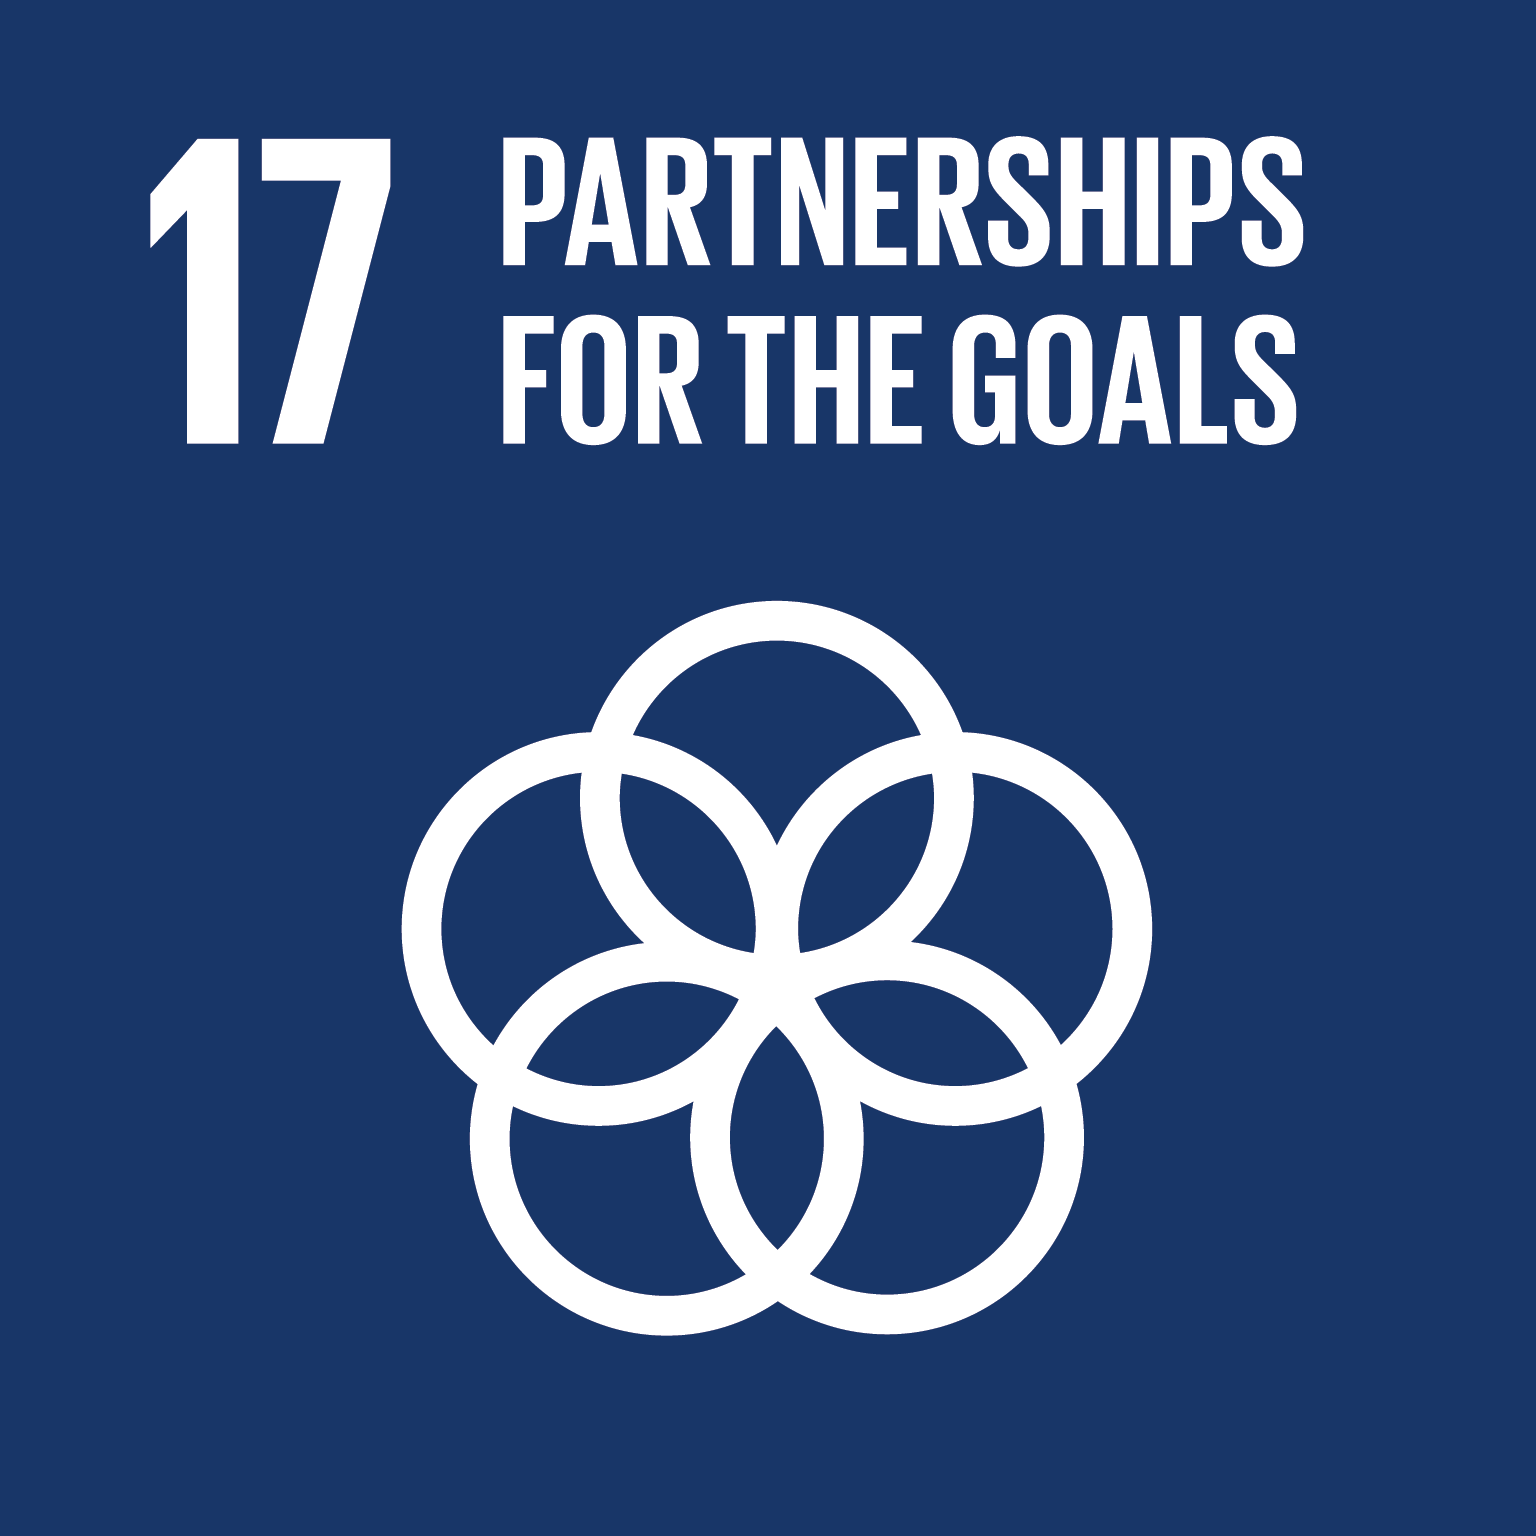 17 - Partnerships for the Goals